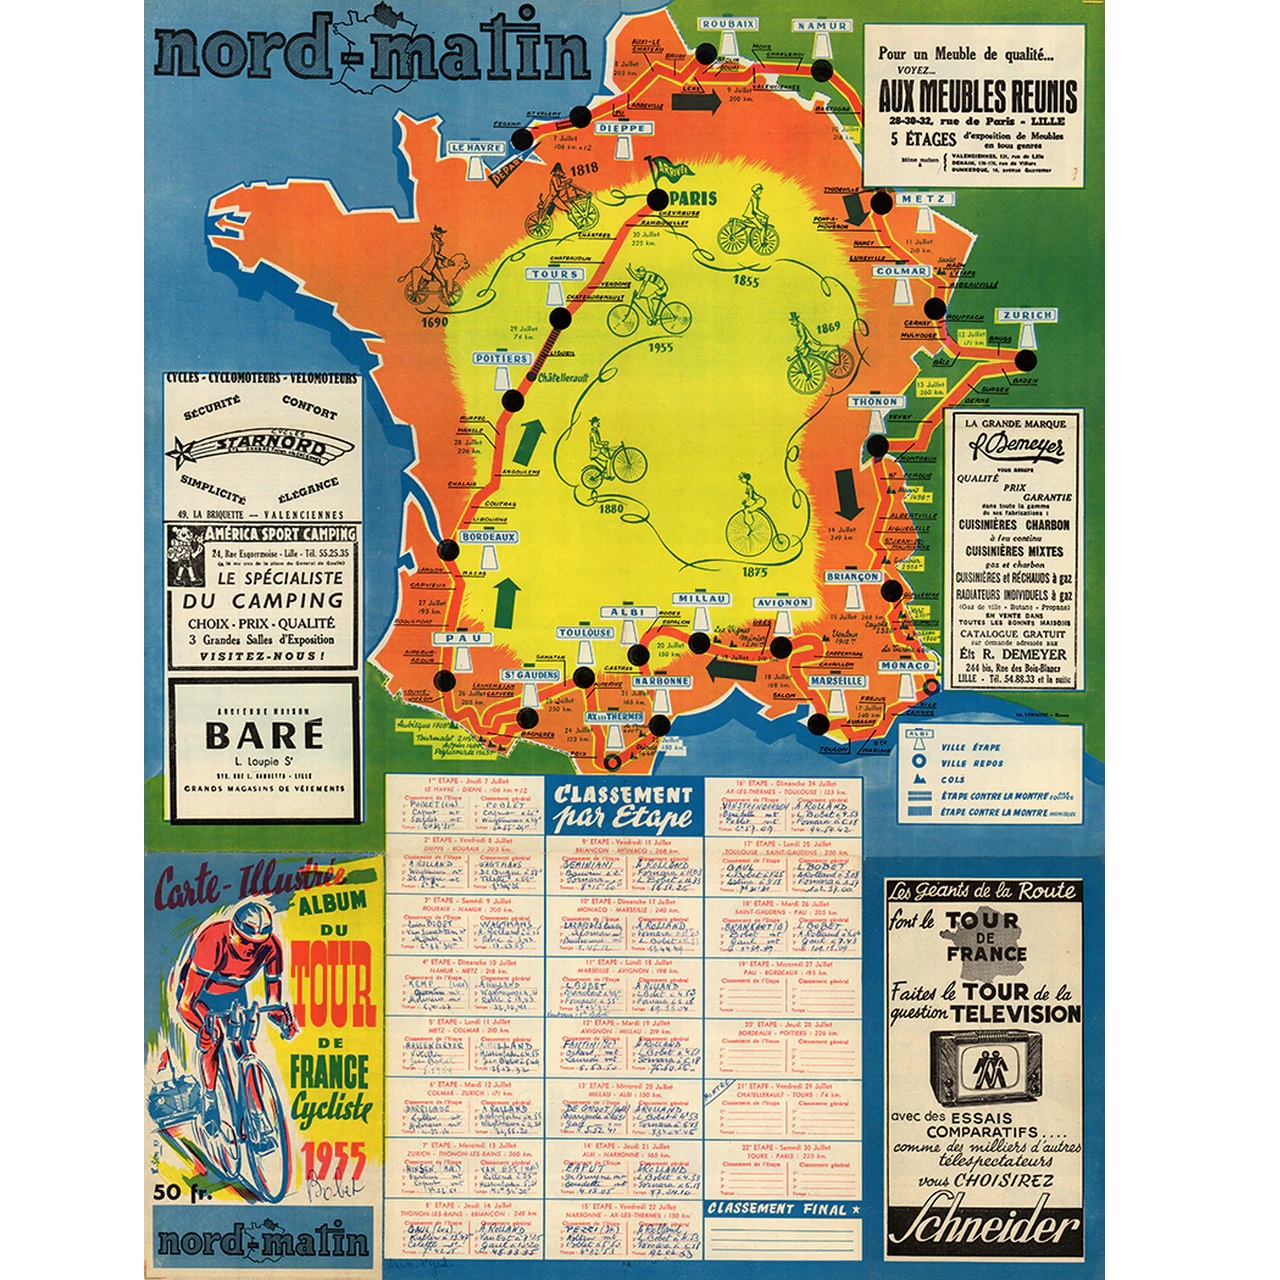 1955 Tour de France Map - nord-matin (TDF) Route Map Poster 18" x 24"